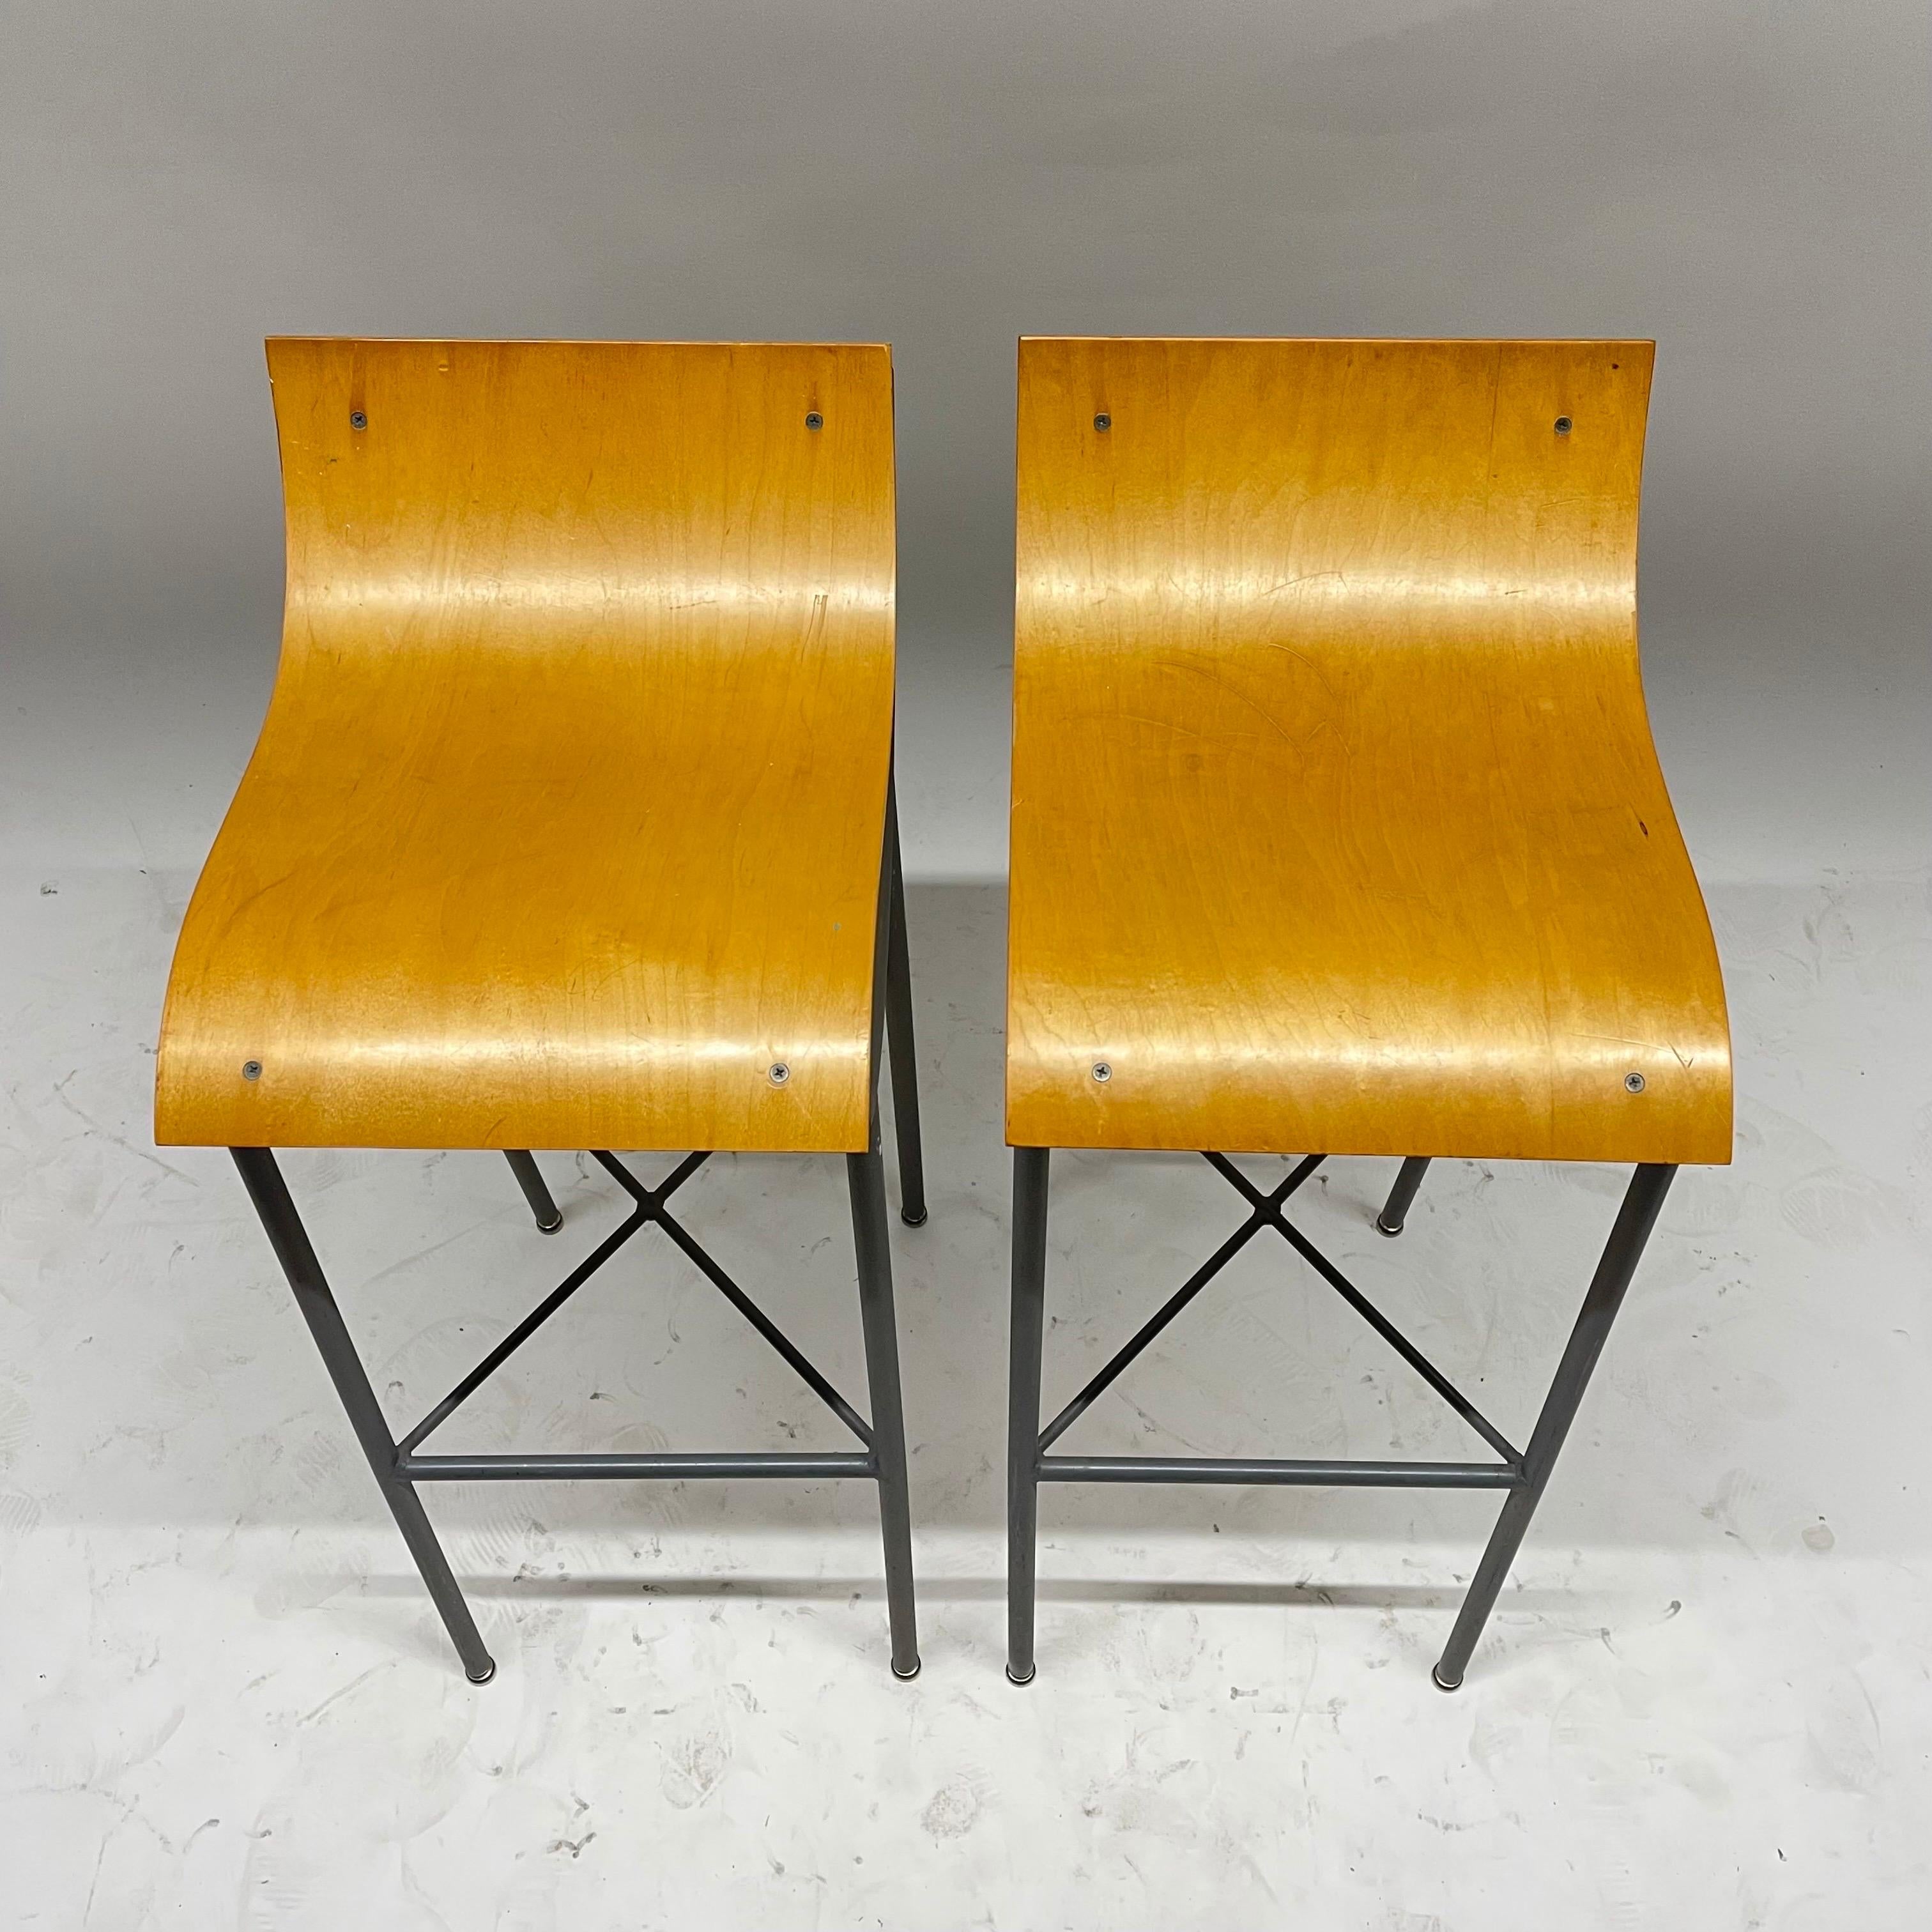 Paint Pair of Post Modern Sculptural Steel and Bent Plywood Bar Stools, circa 1980s For Sale